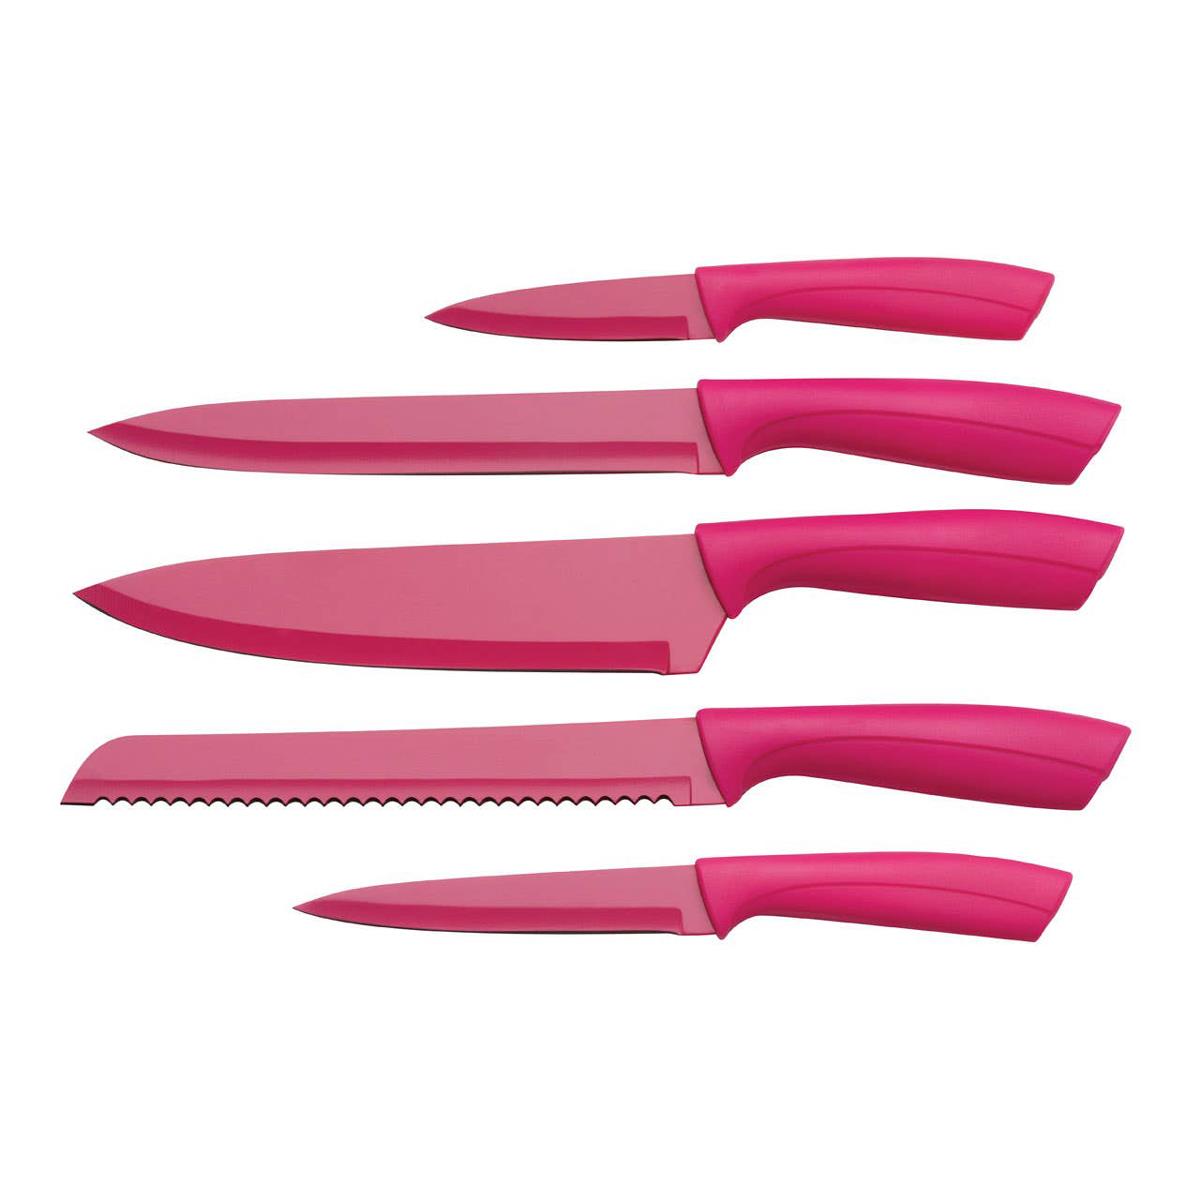 https://www.idealtextiles.shop/wp-content/uploads/1699/12/choose-from-a-wide-variety-of-great-quality-at-low-prices-from-brights-pink-5-piece-knife-block-set-aubina-x_3.jpg